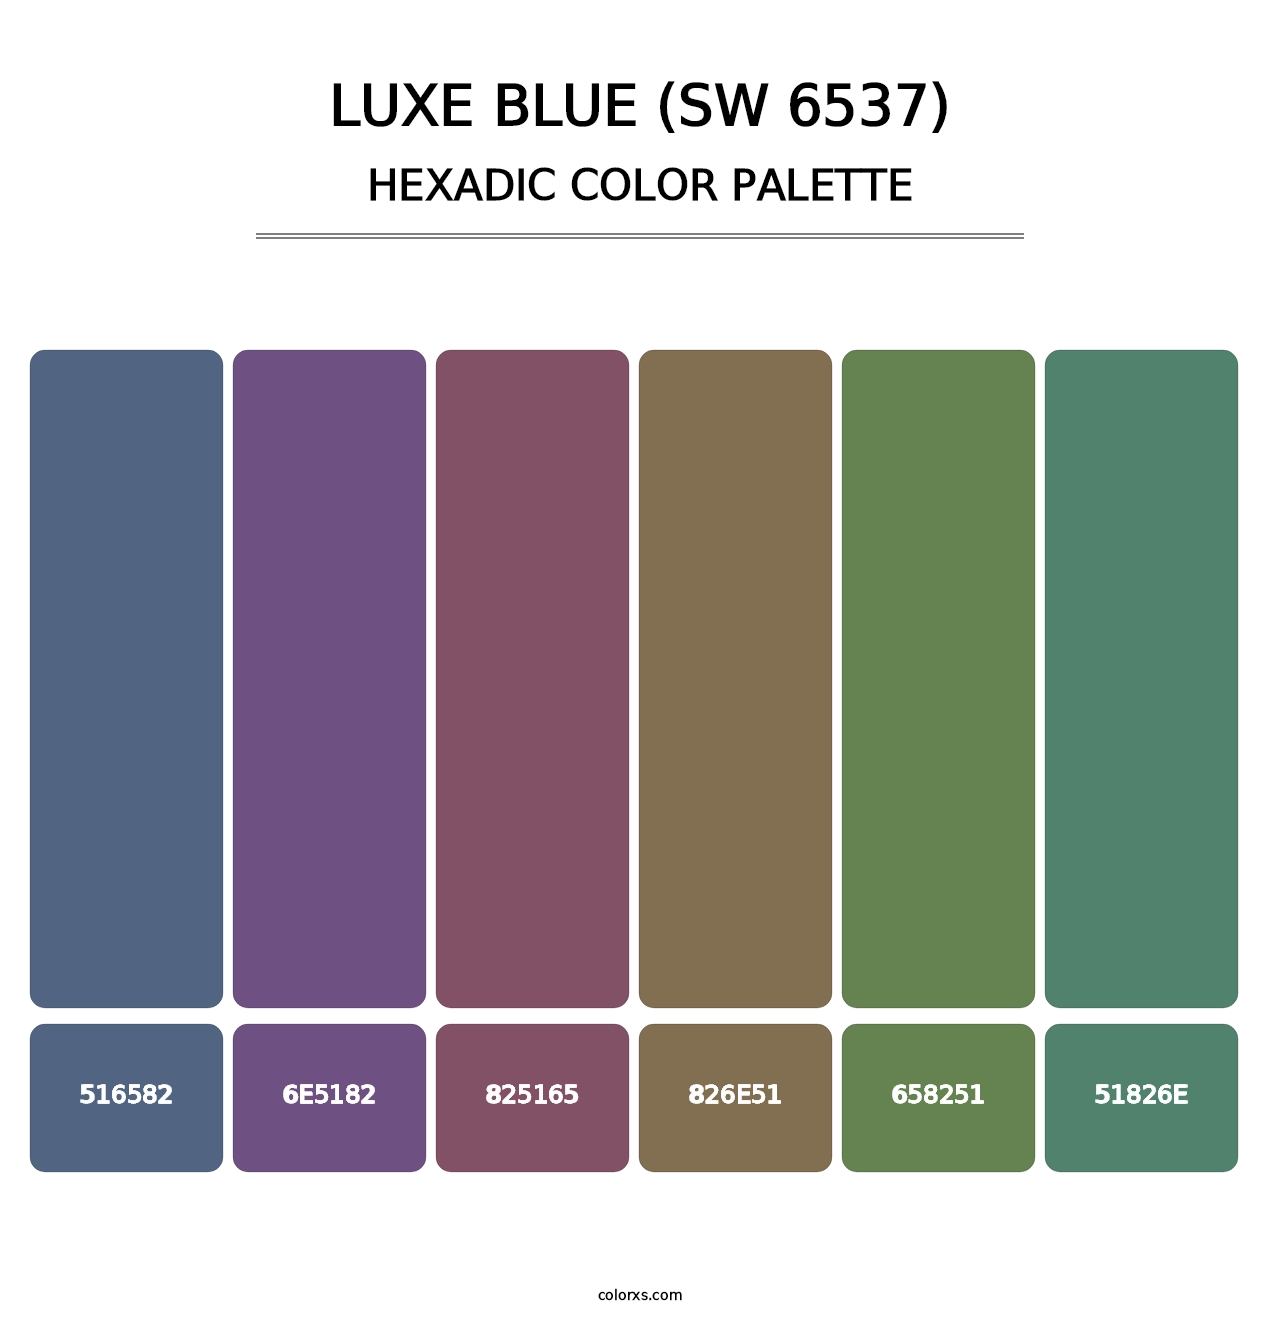 Luxe Blue (SW 6537) - Hexadic Color Palette